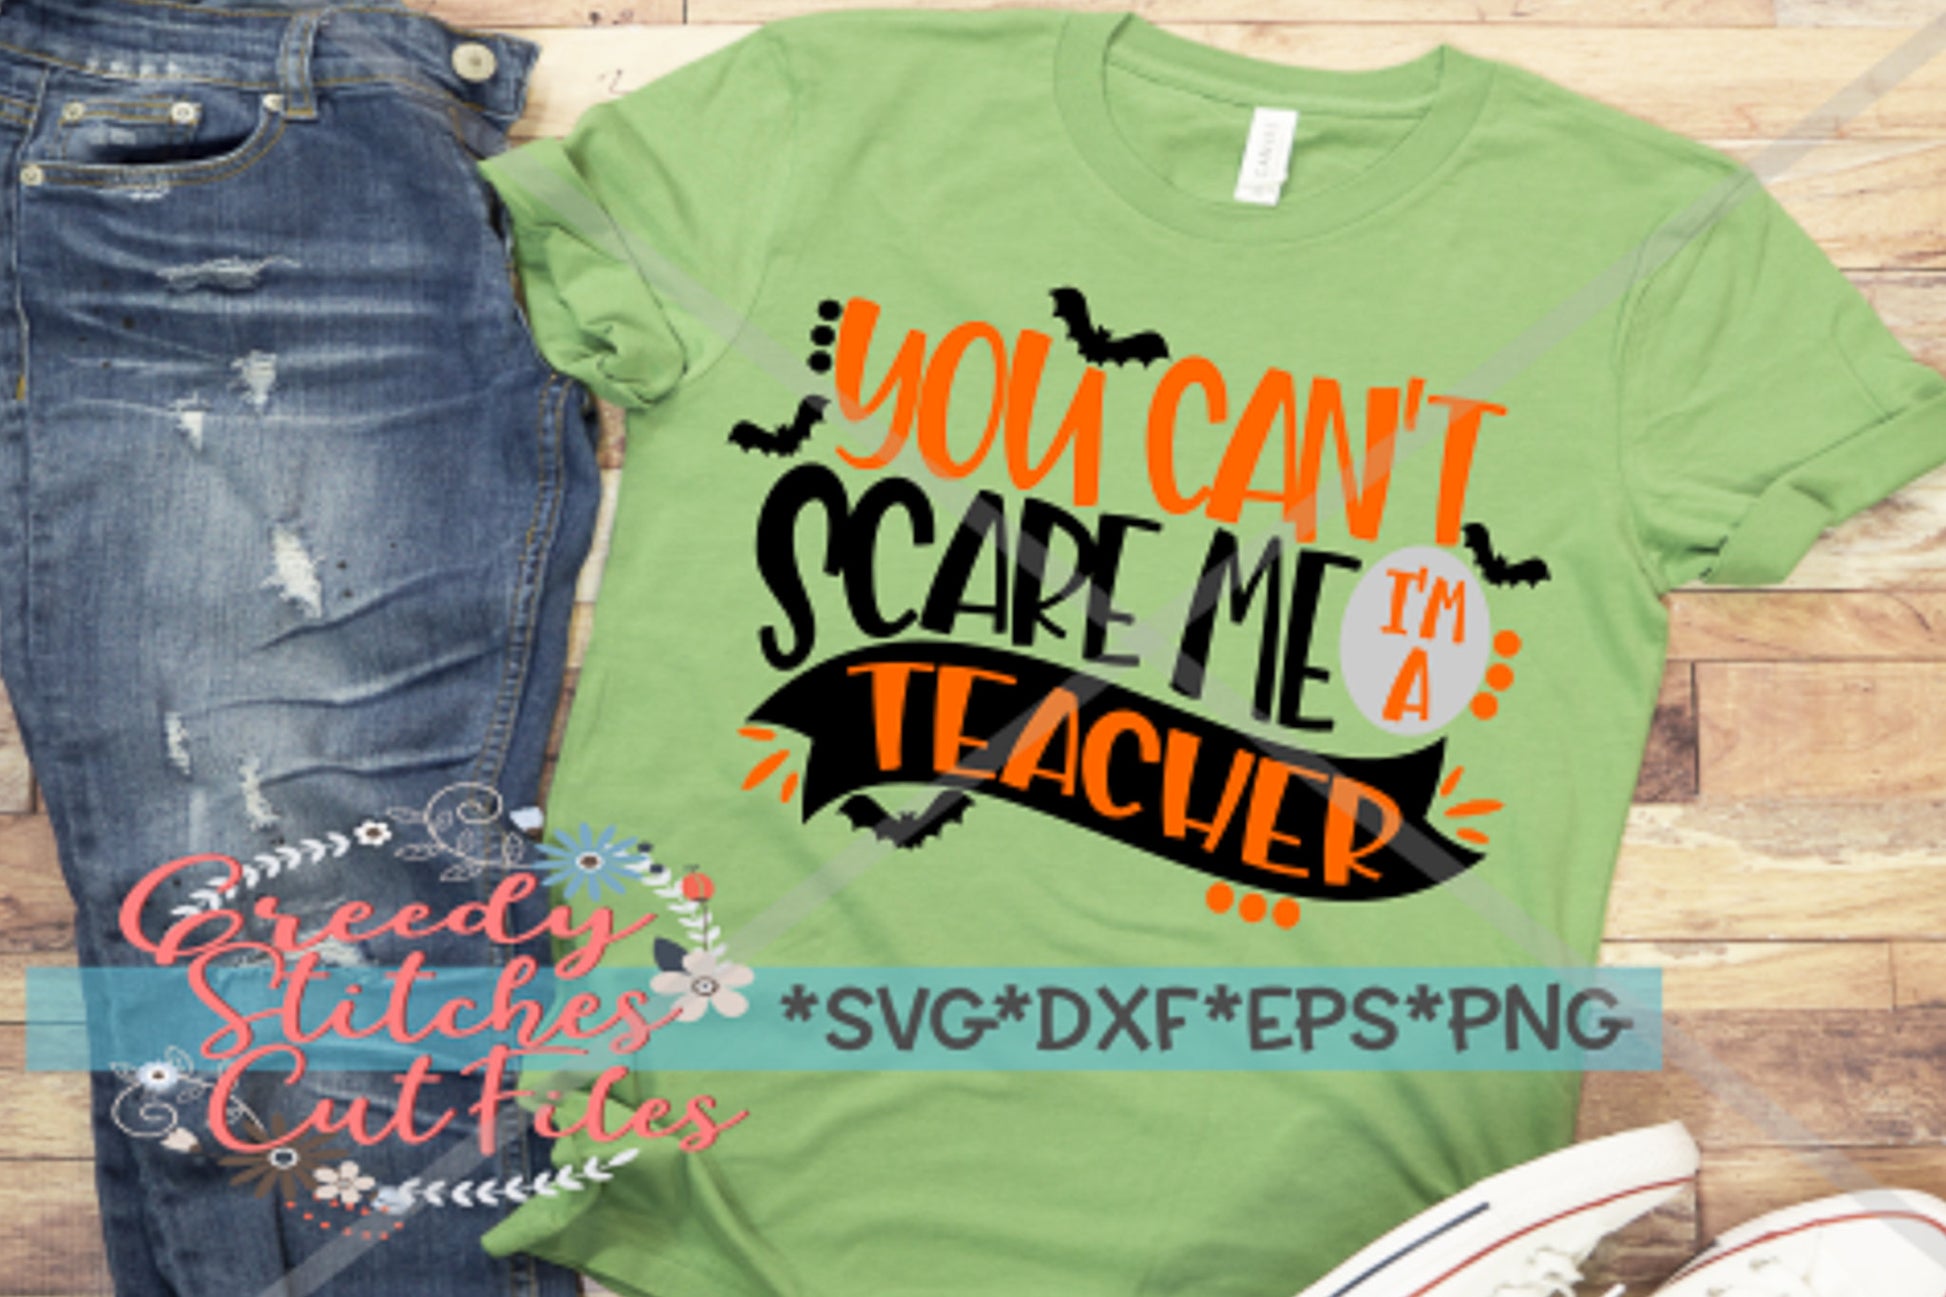 Halloween SVG | You Can&#39;t Scare Me I&#39;m A Teacher  svg, dxf, eps, png. Teacher SvG | SvG | Teacher Halloween DxF | Instant Download Cut Files